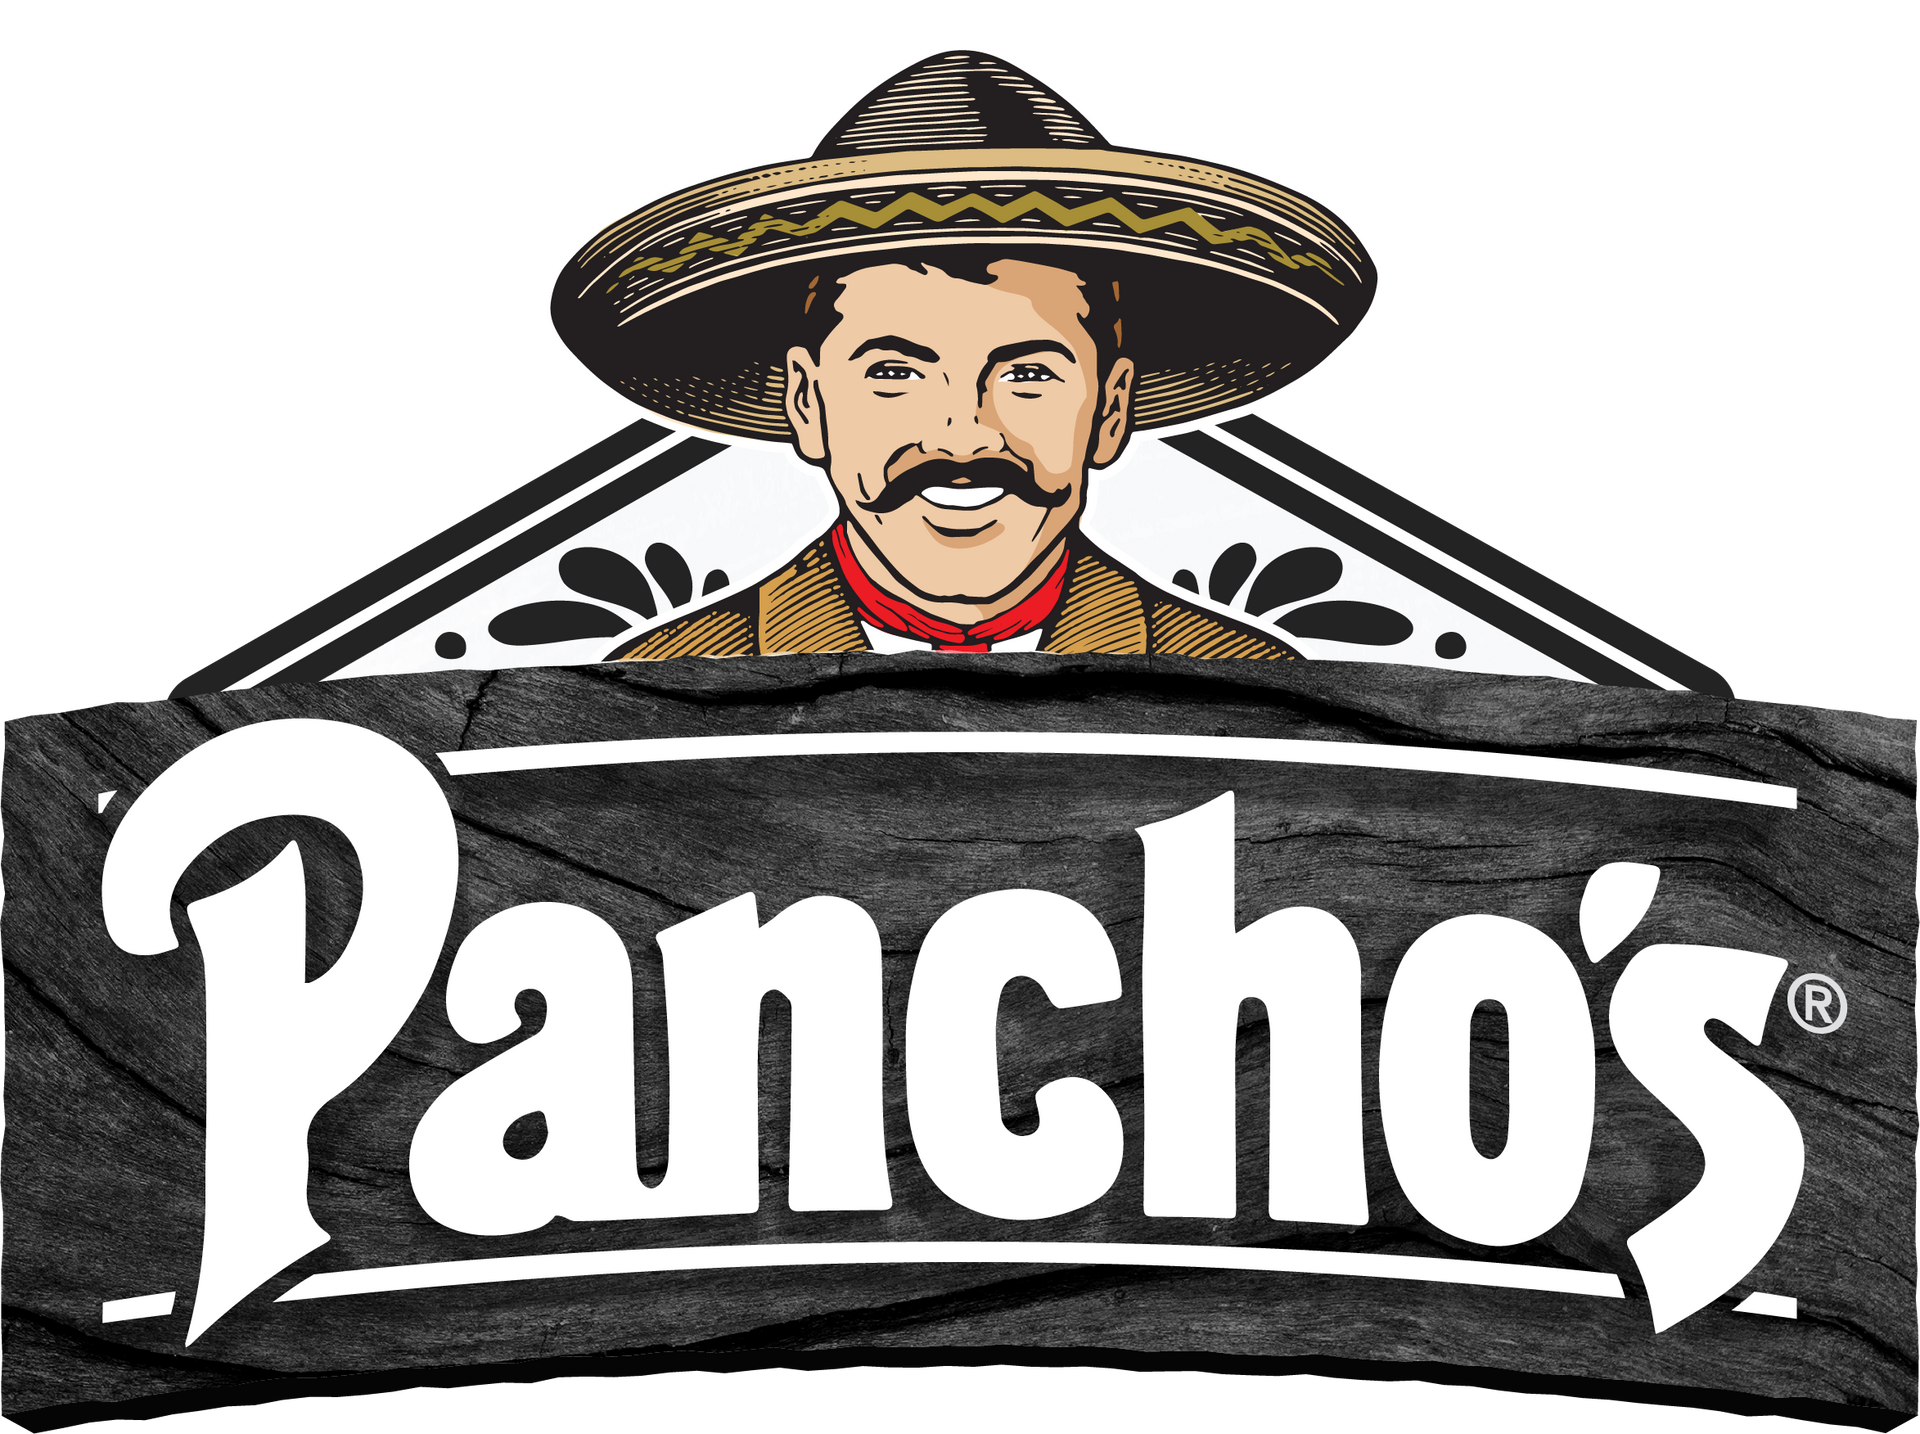 The logo for Pancho's mexican restaurant.